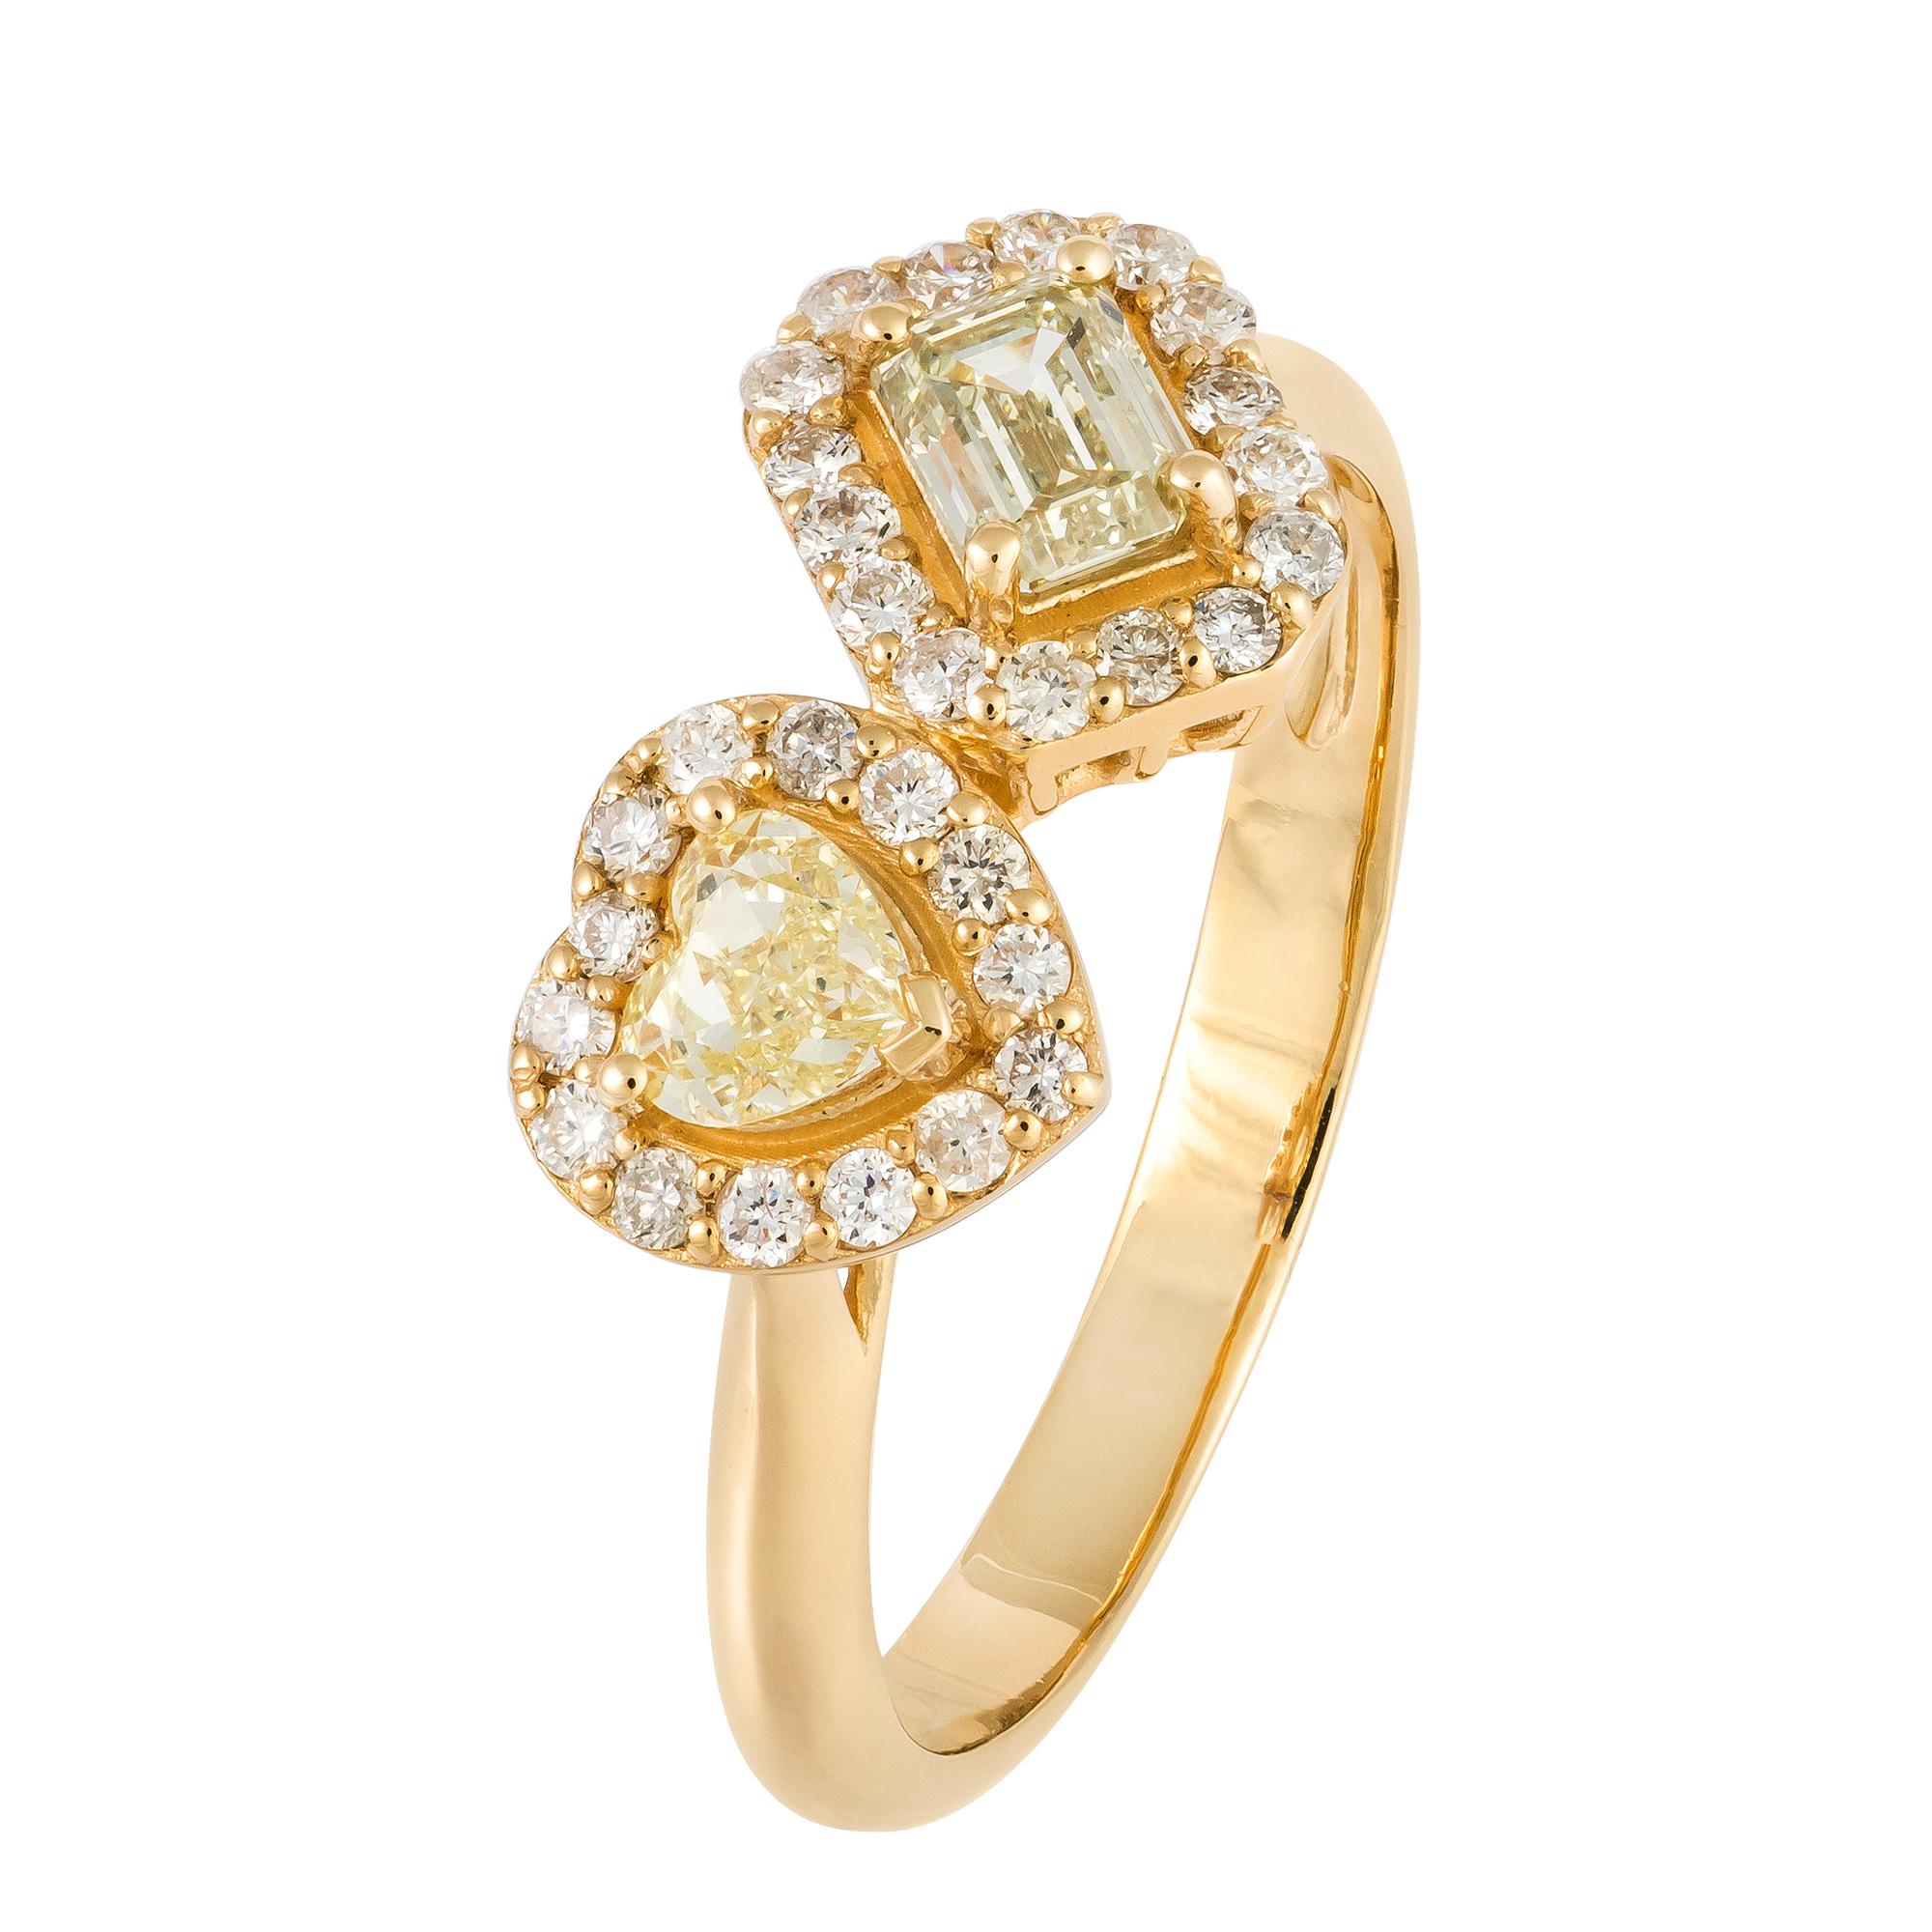 For Sale:  Impressive Yellow 18K Gold White Yellow Diamond Ring For Her 4